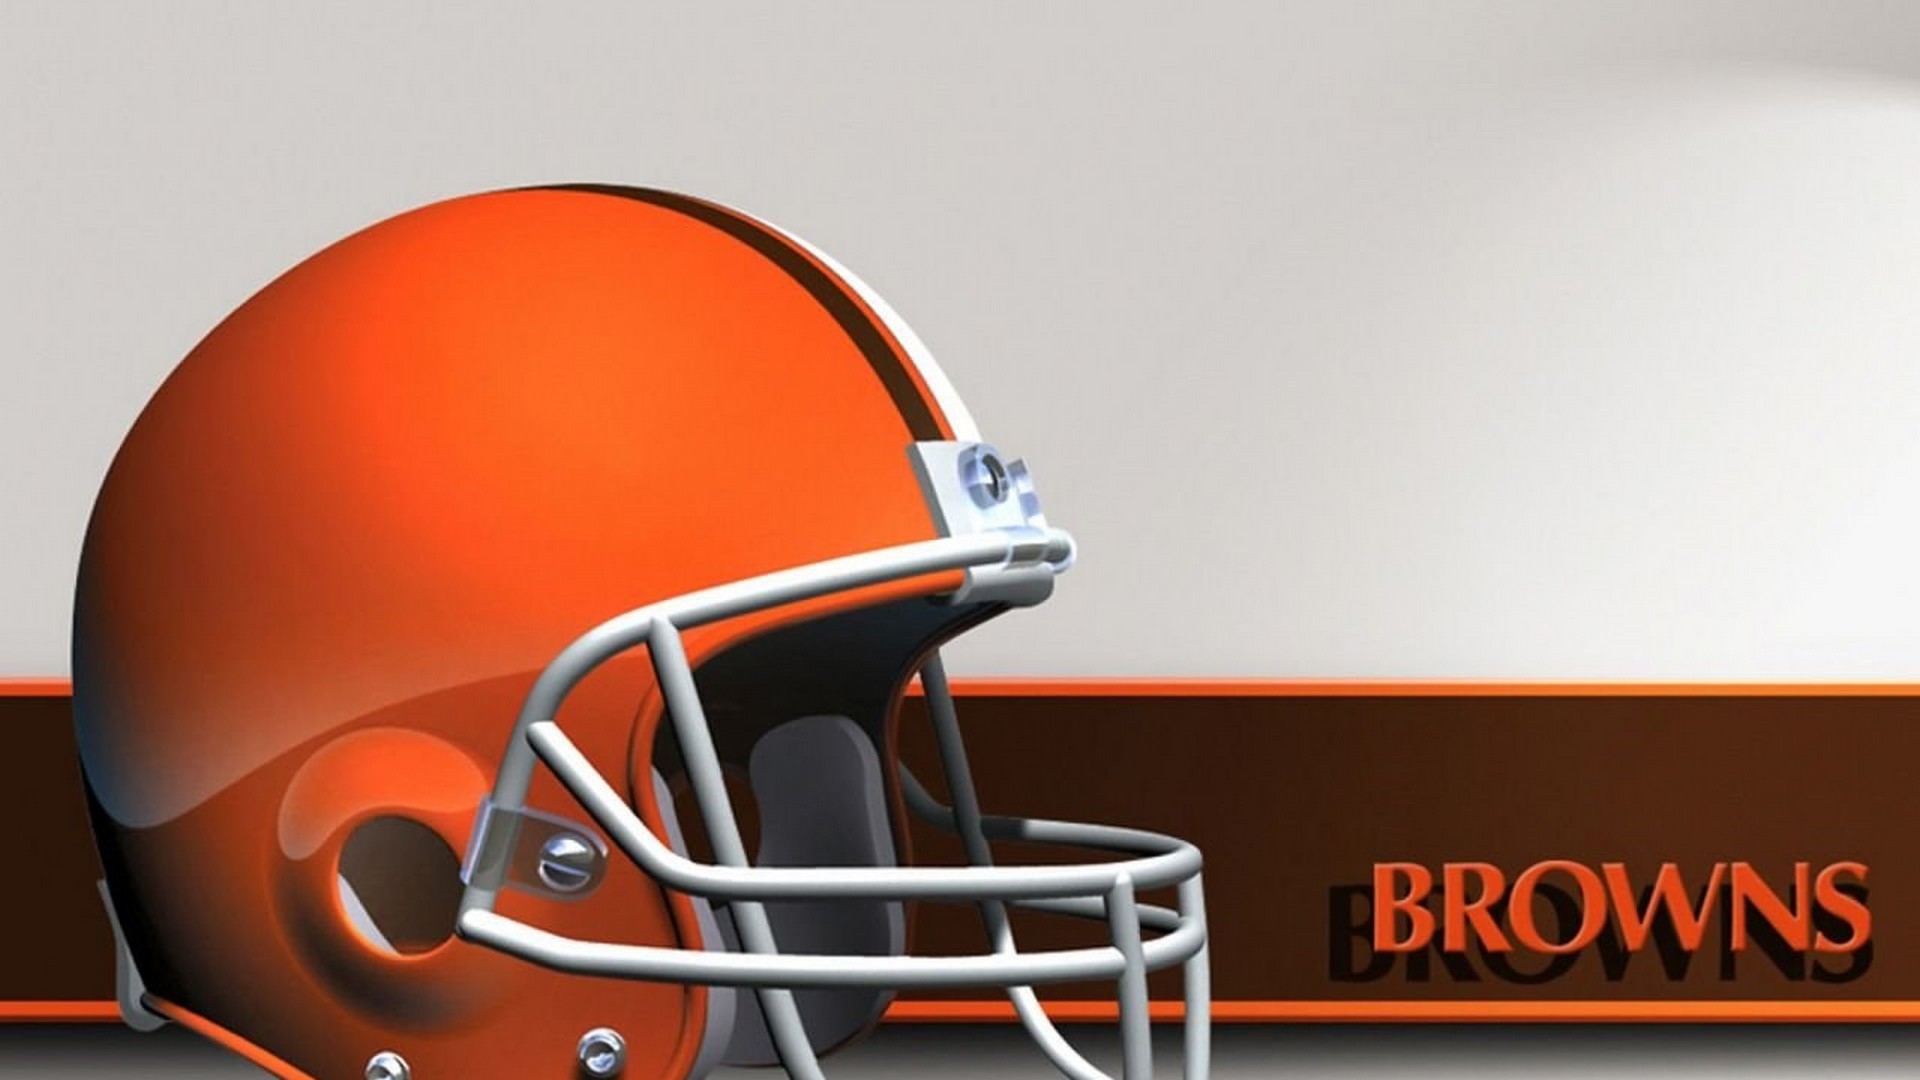 Best Cleveland Browns Wallpaper in HD with high-resolution 1920x1080 pixel. Download and set as wallpaper for Desktop Computer, Apple iPhone X, XS Max, XR, 8, 7, 6, SE, iPad, Android